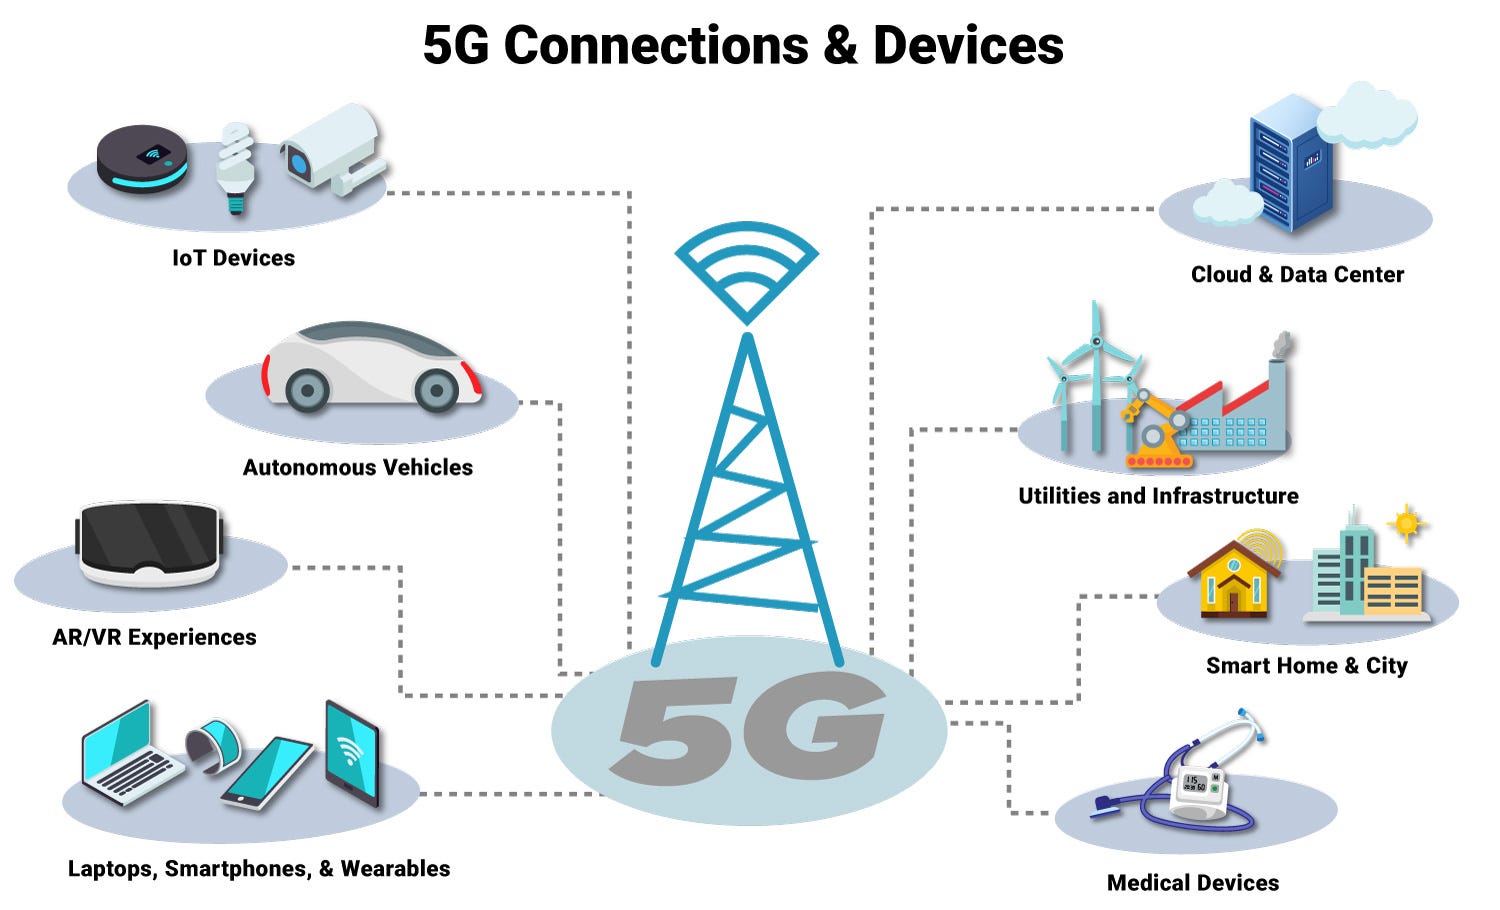 https://zvelo.com/impacts-5g-part-1-wireless-technology-device-growth/